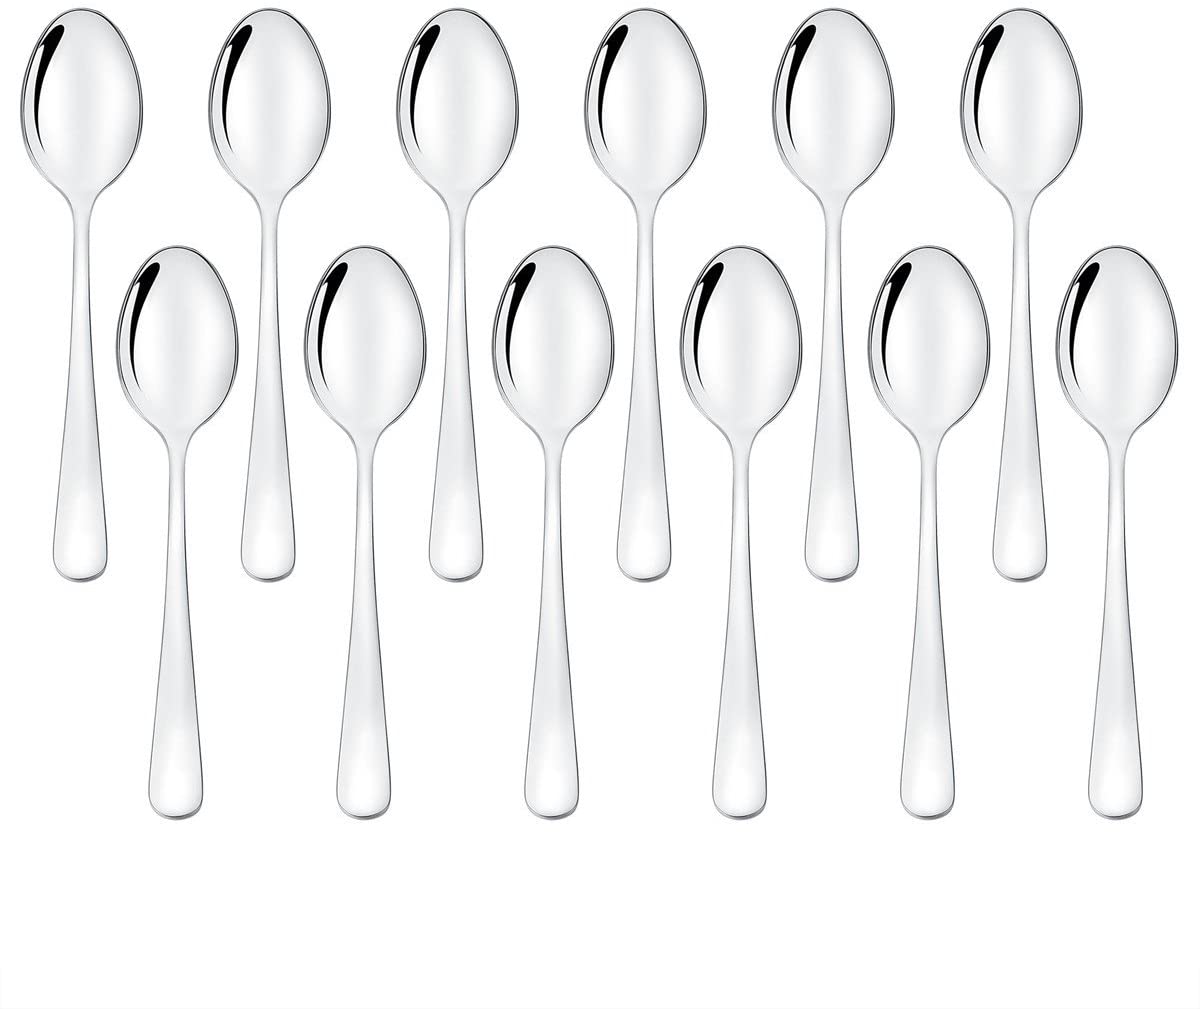 Demitasse Spoons Set of 12, Mini Coffee Spoons, LEYOSOV Stainless Steel Espresso Spoons, Small Spoons for Dessert, Tea, Appetizer, 4 inch - (For 12 piece(s))